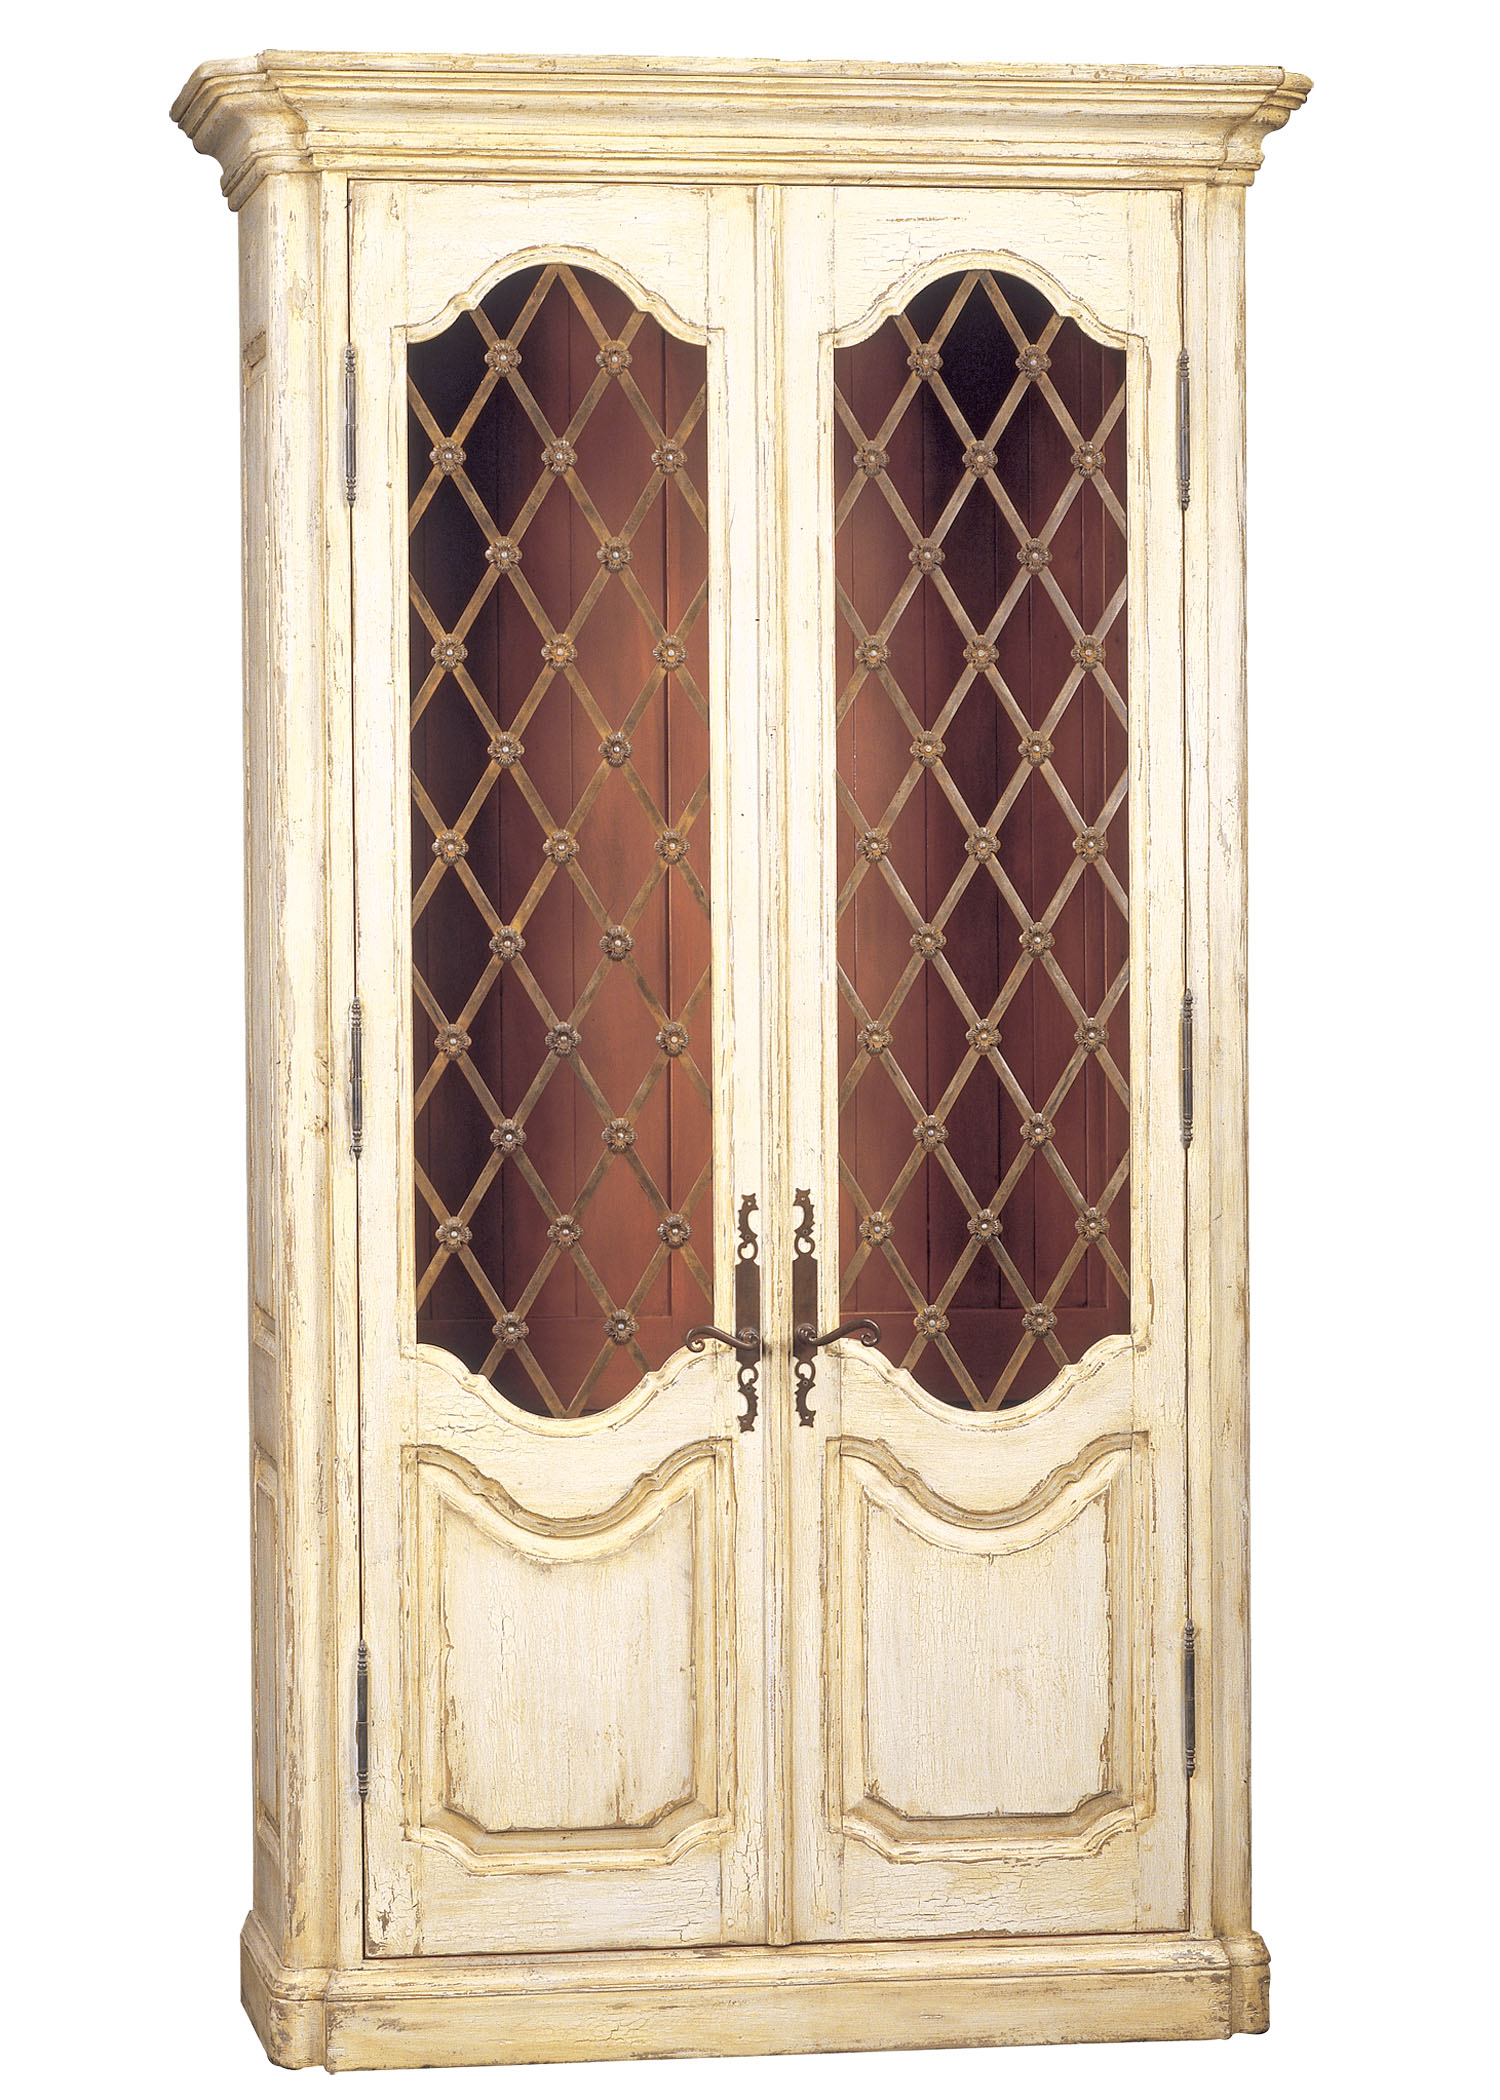 Verona traditional antiqued distressed cabinet armoire with metal grille in two doors by Woodland Furniture in Idaho Falls